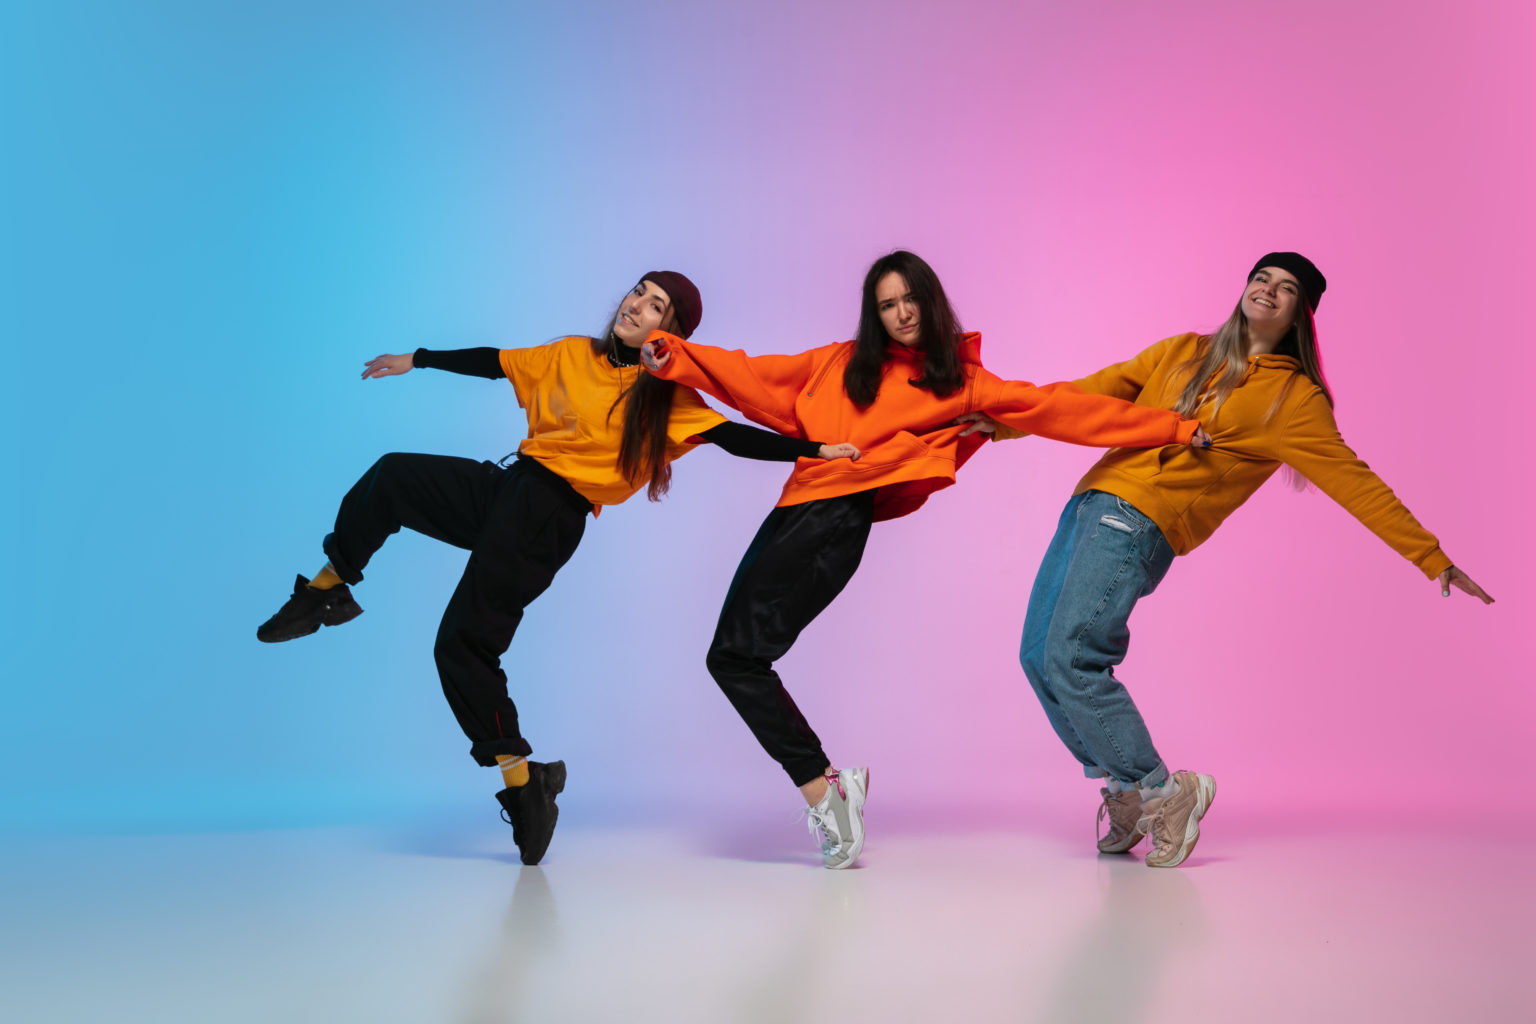 Beautiful sportive girls dancing hip-hop in stylish clothes on colorful gradient studio background in neon light. Youth culture, movement, style and fashion, action. Fashionable bright portrait.